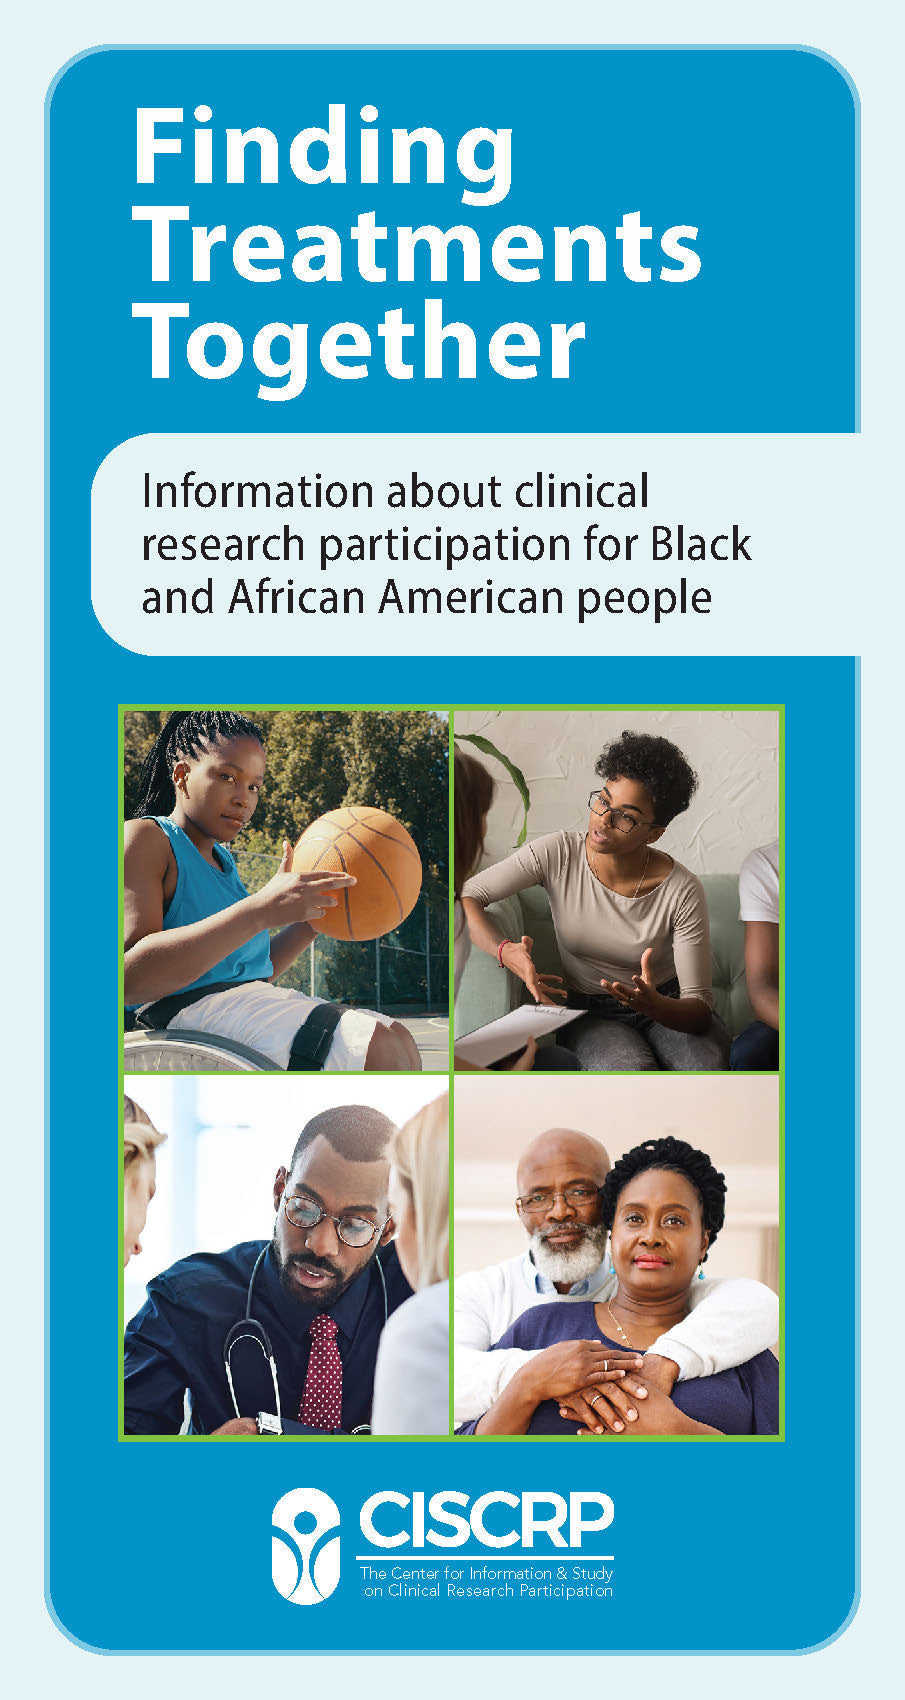 Clinical Research Participation for Black and African American People